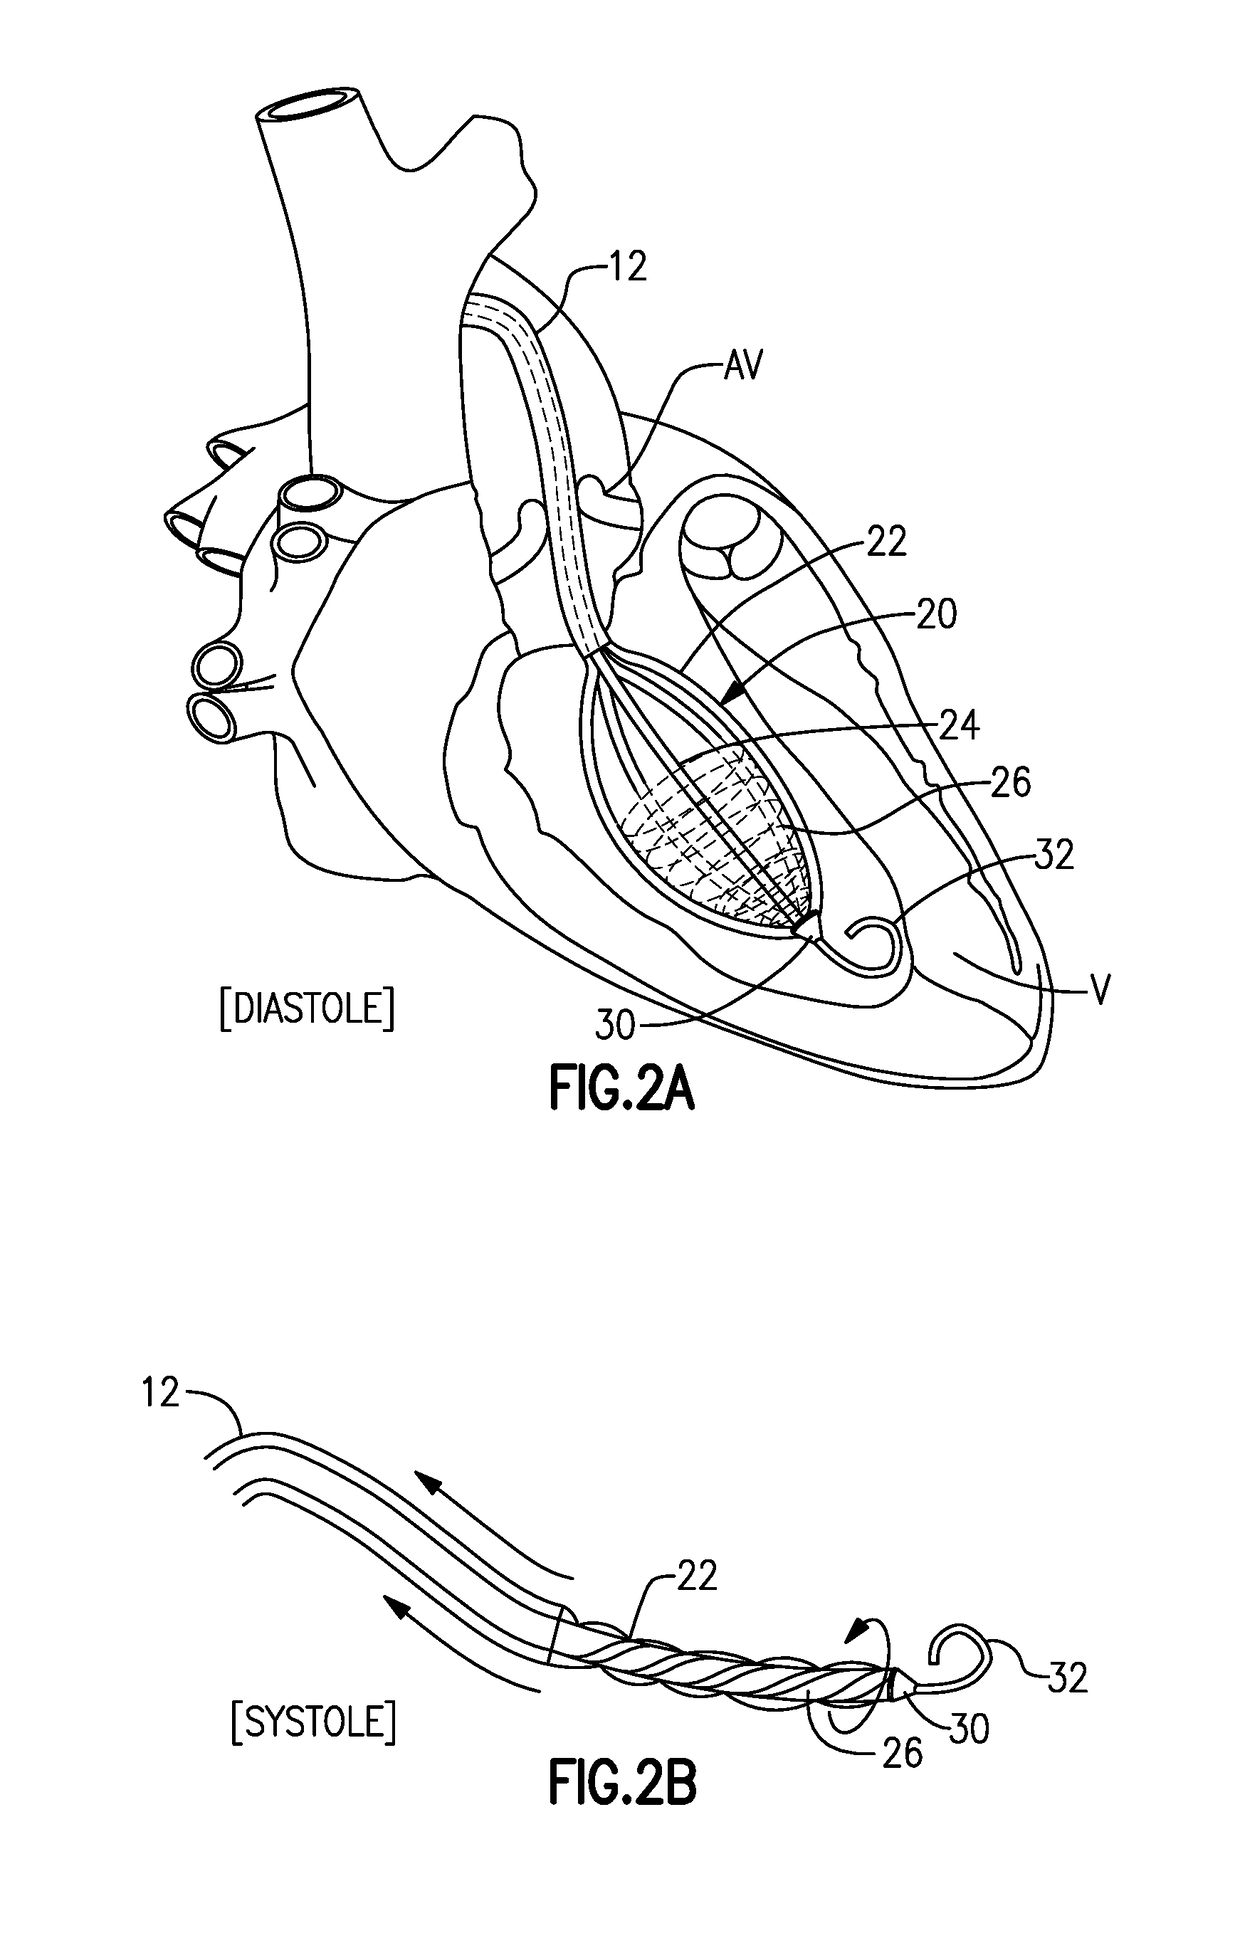 Left ventricle heart-assist device